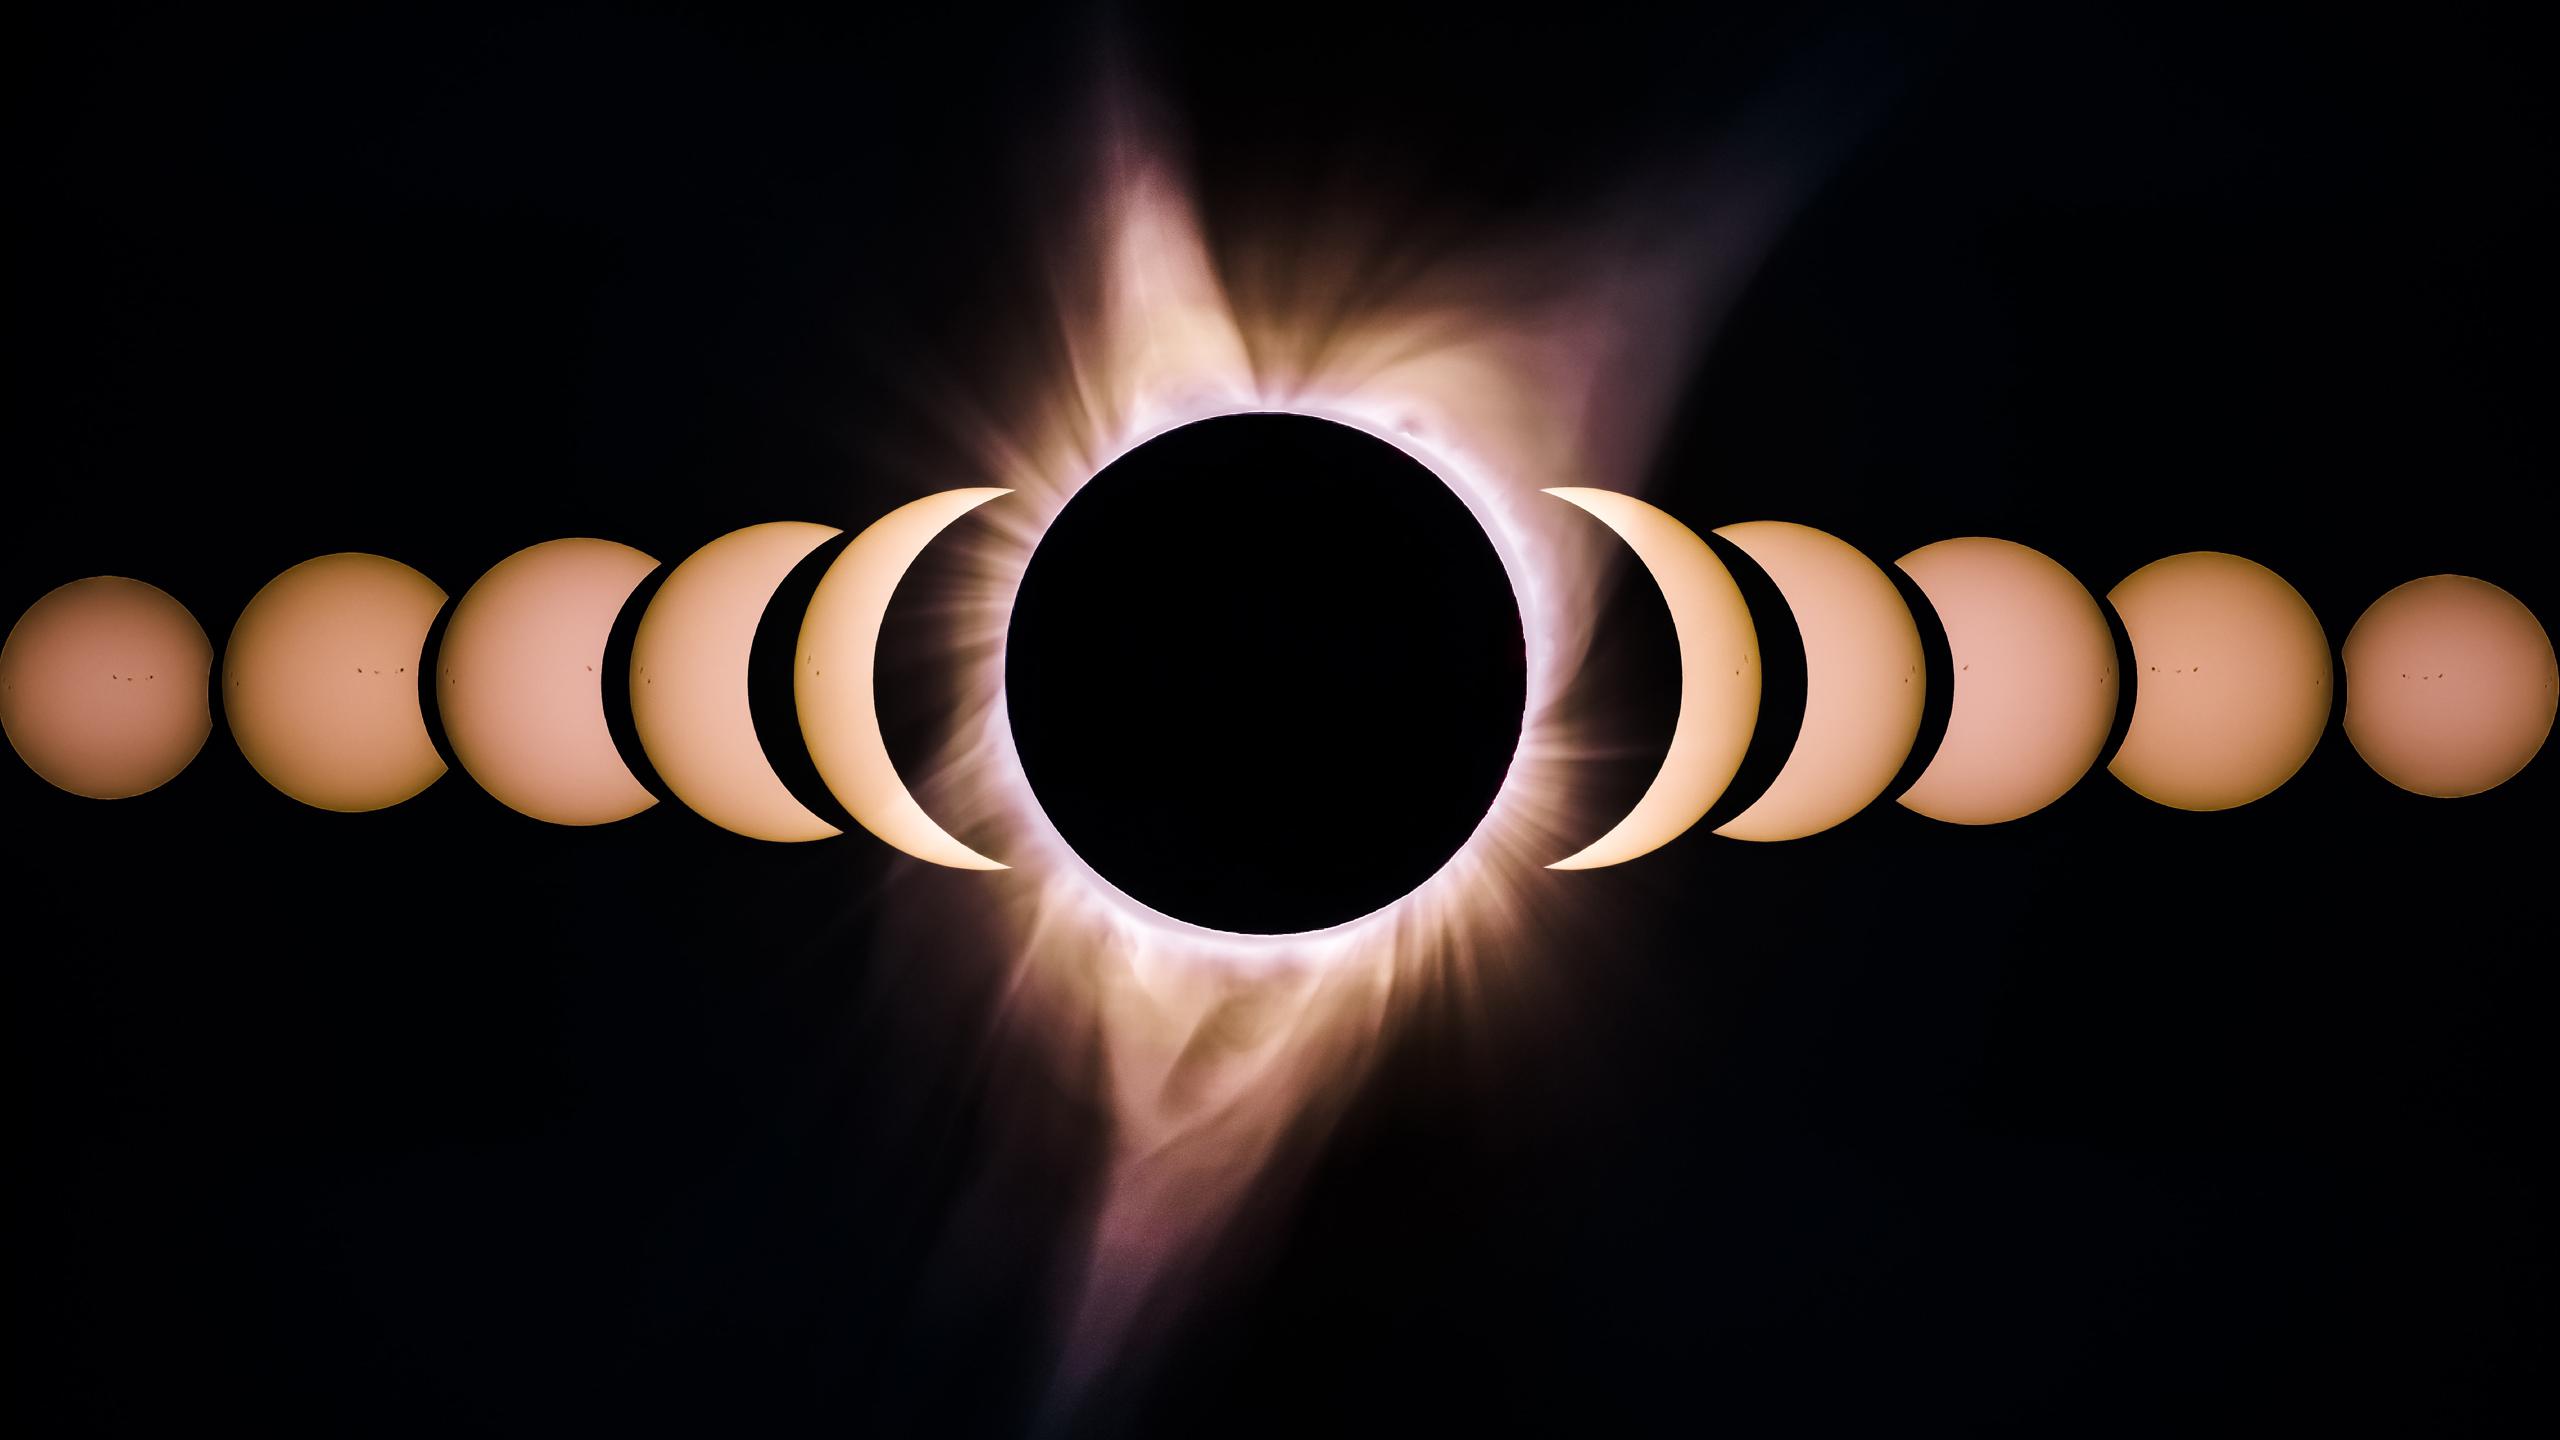 Eclipse Wallpapers HD Eclipse Backgrounds Free Images Download